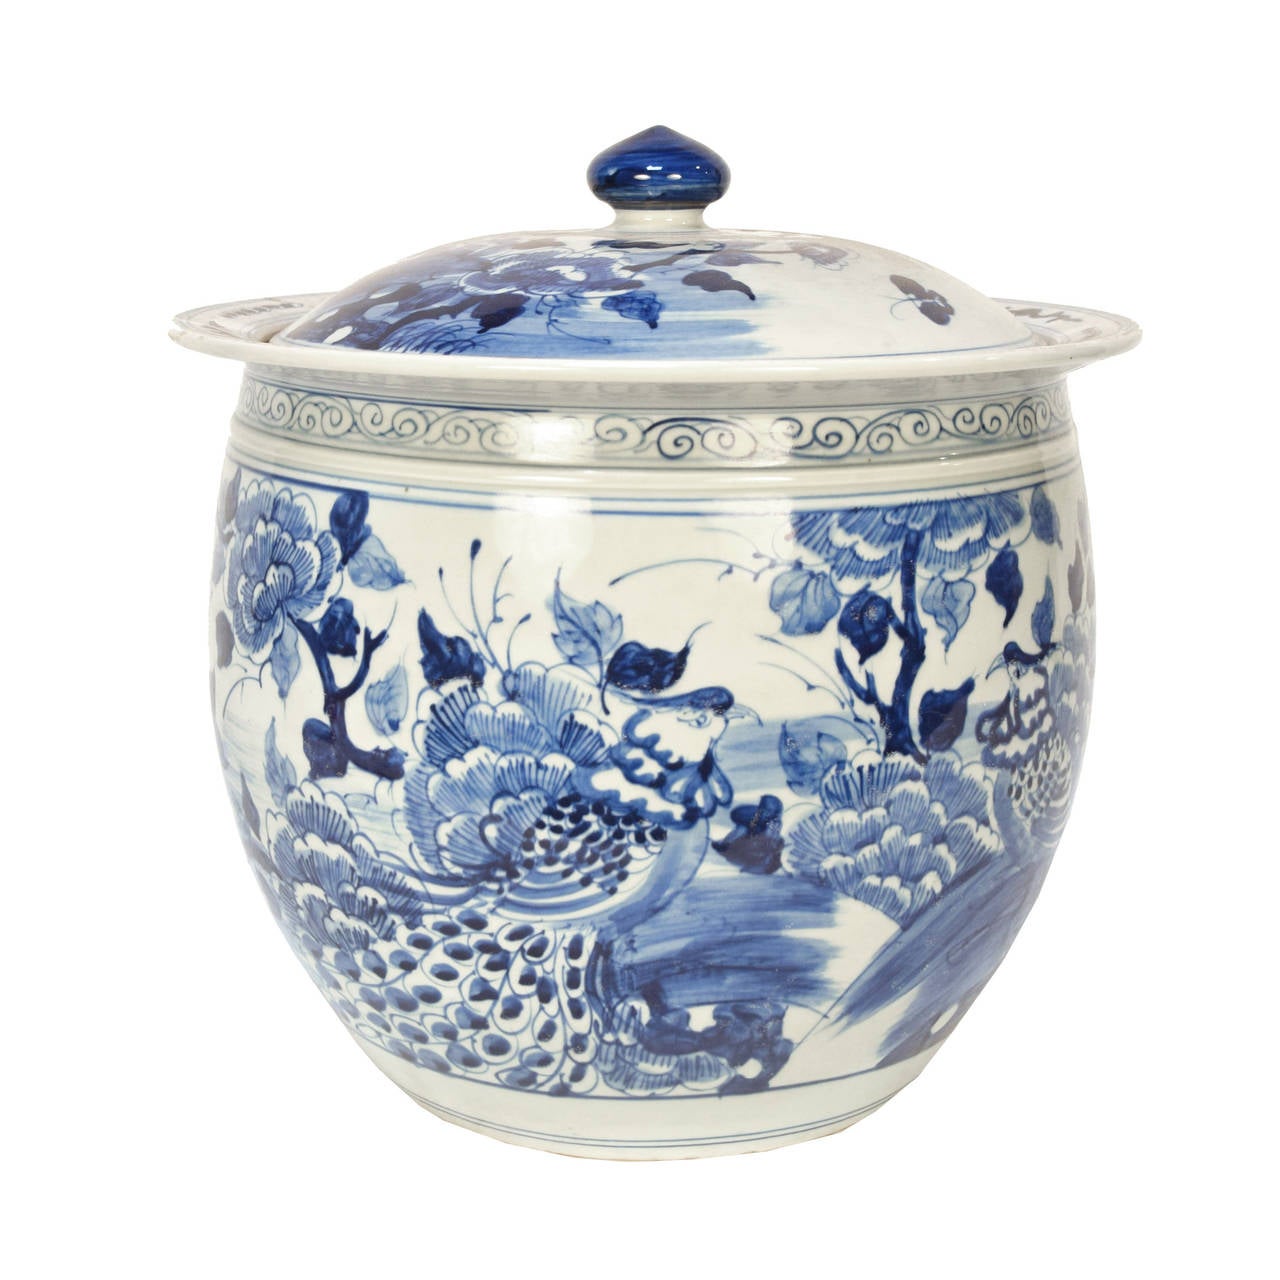 A blue and white ceramic jar with a lid from Beijing, China painted in a floral scene with phoenix.

         